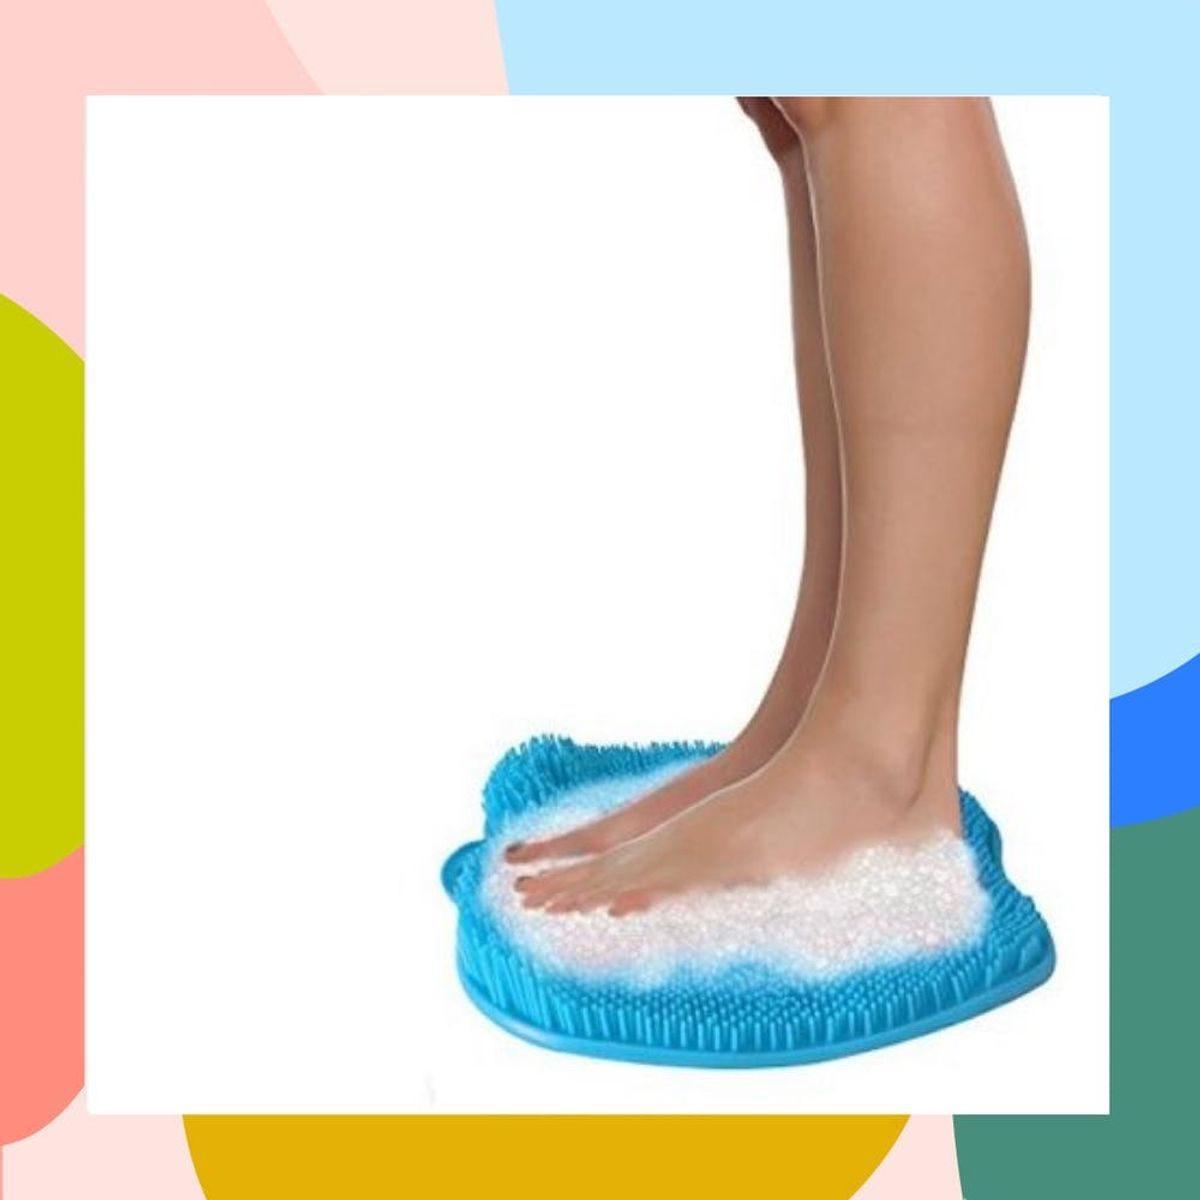 12 Essential Beauty Products for Pretty Summer Feet